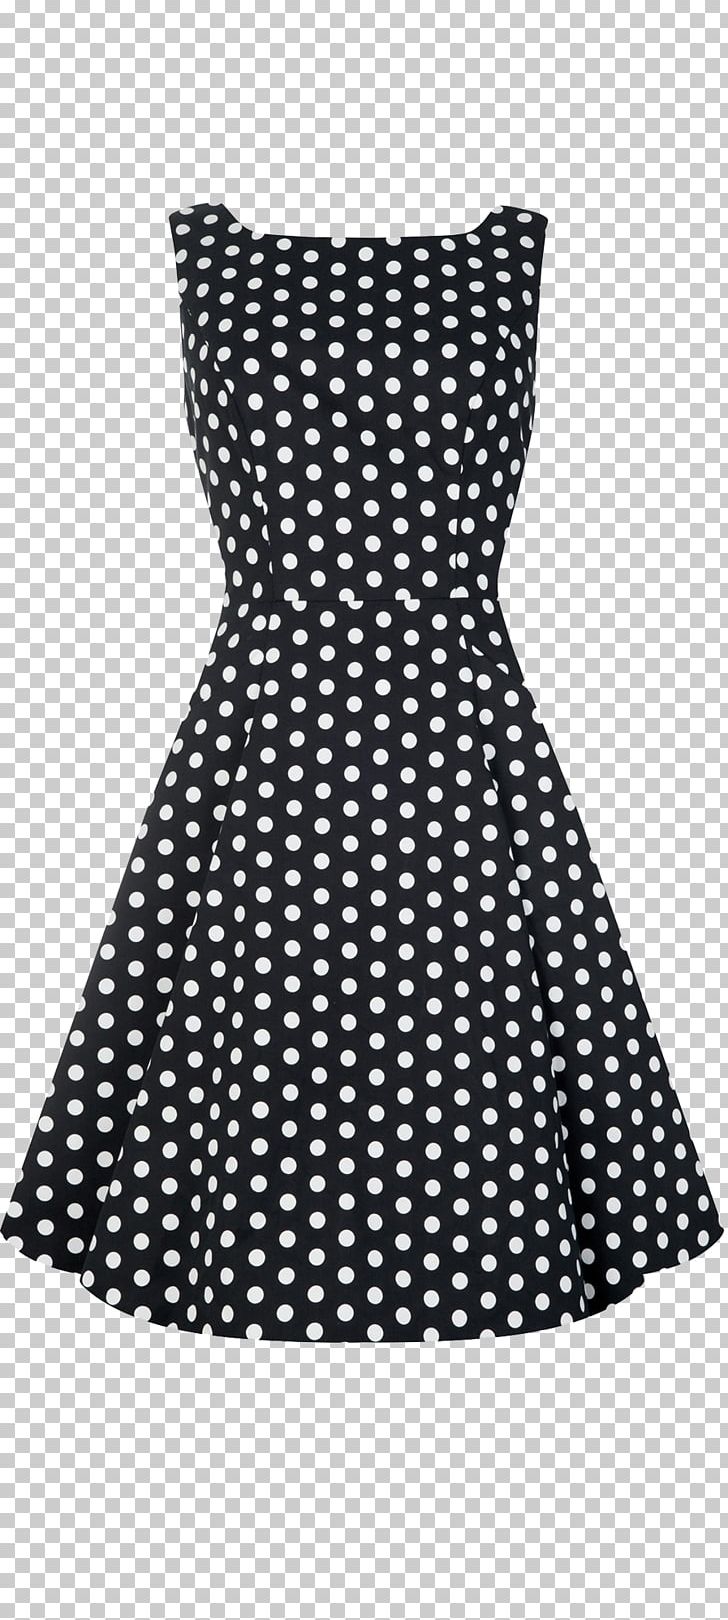 1950s Polka Dot Clothing Sizes Vintage Clothing Dress PNG, Clipart, 1950s, Audrey Hepburn, Black, Clothing, Clothing Sizes Free PNG Download